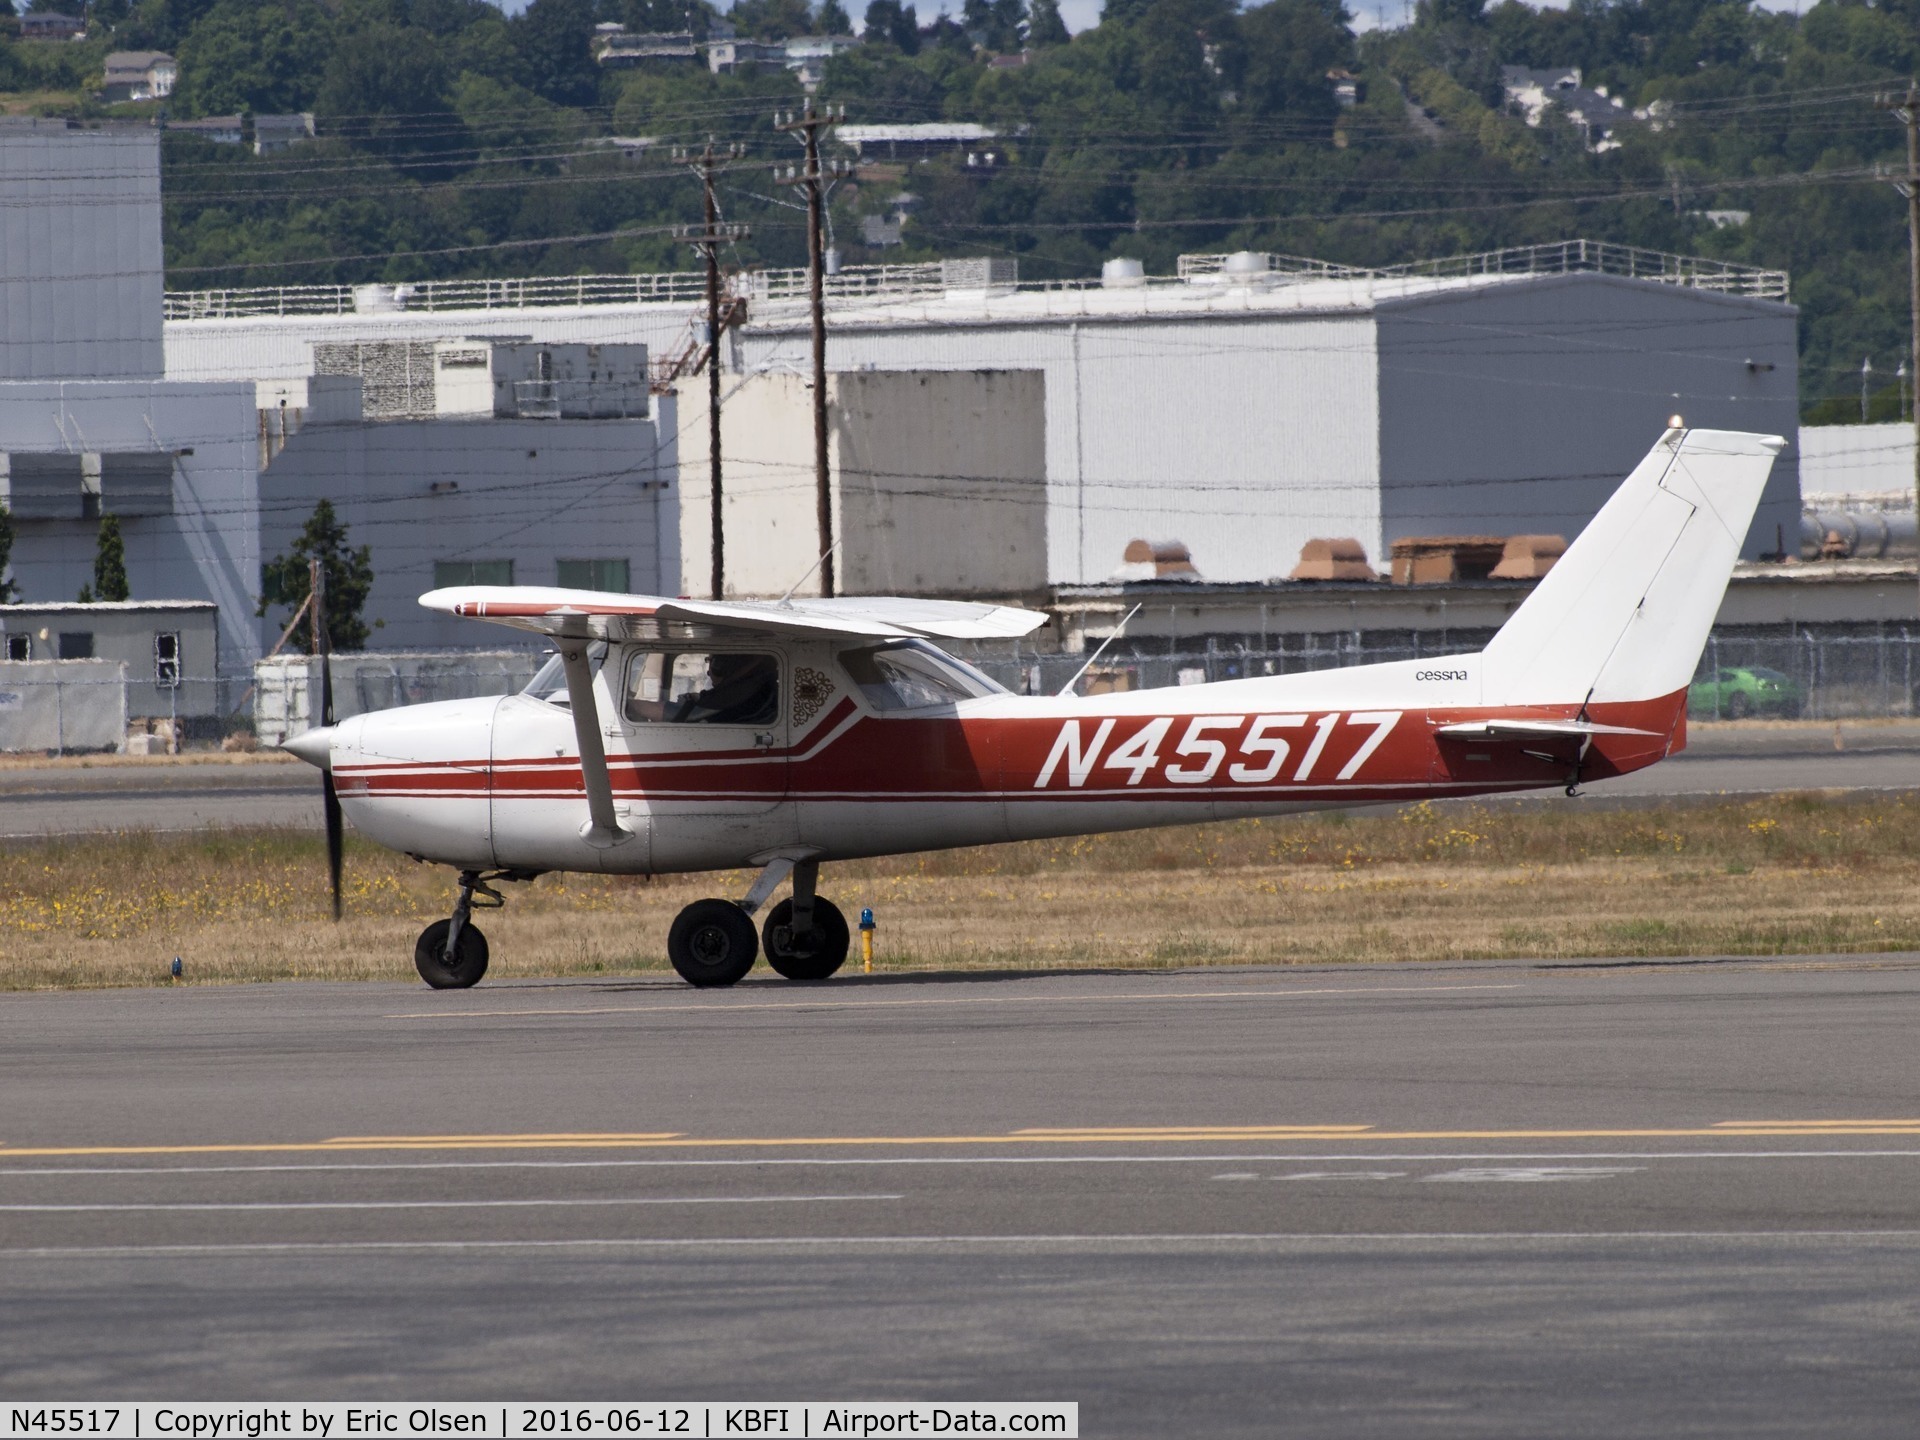 N45517, 1975 Cessna 150M C/N 15076957, Cessna 150 taxing out for takeoff.